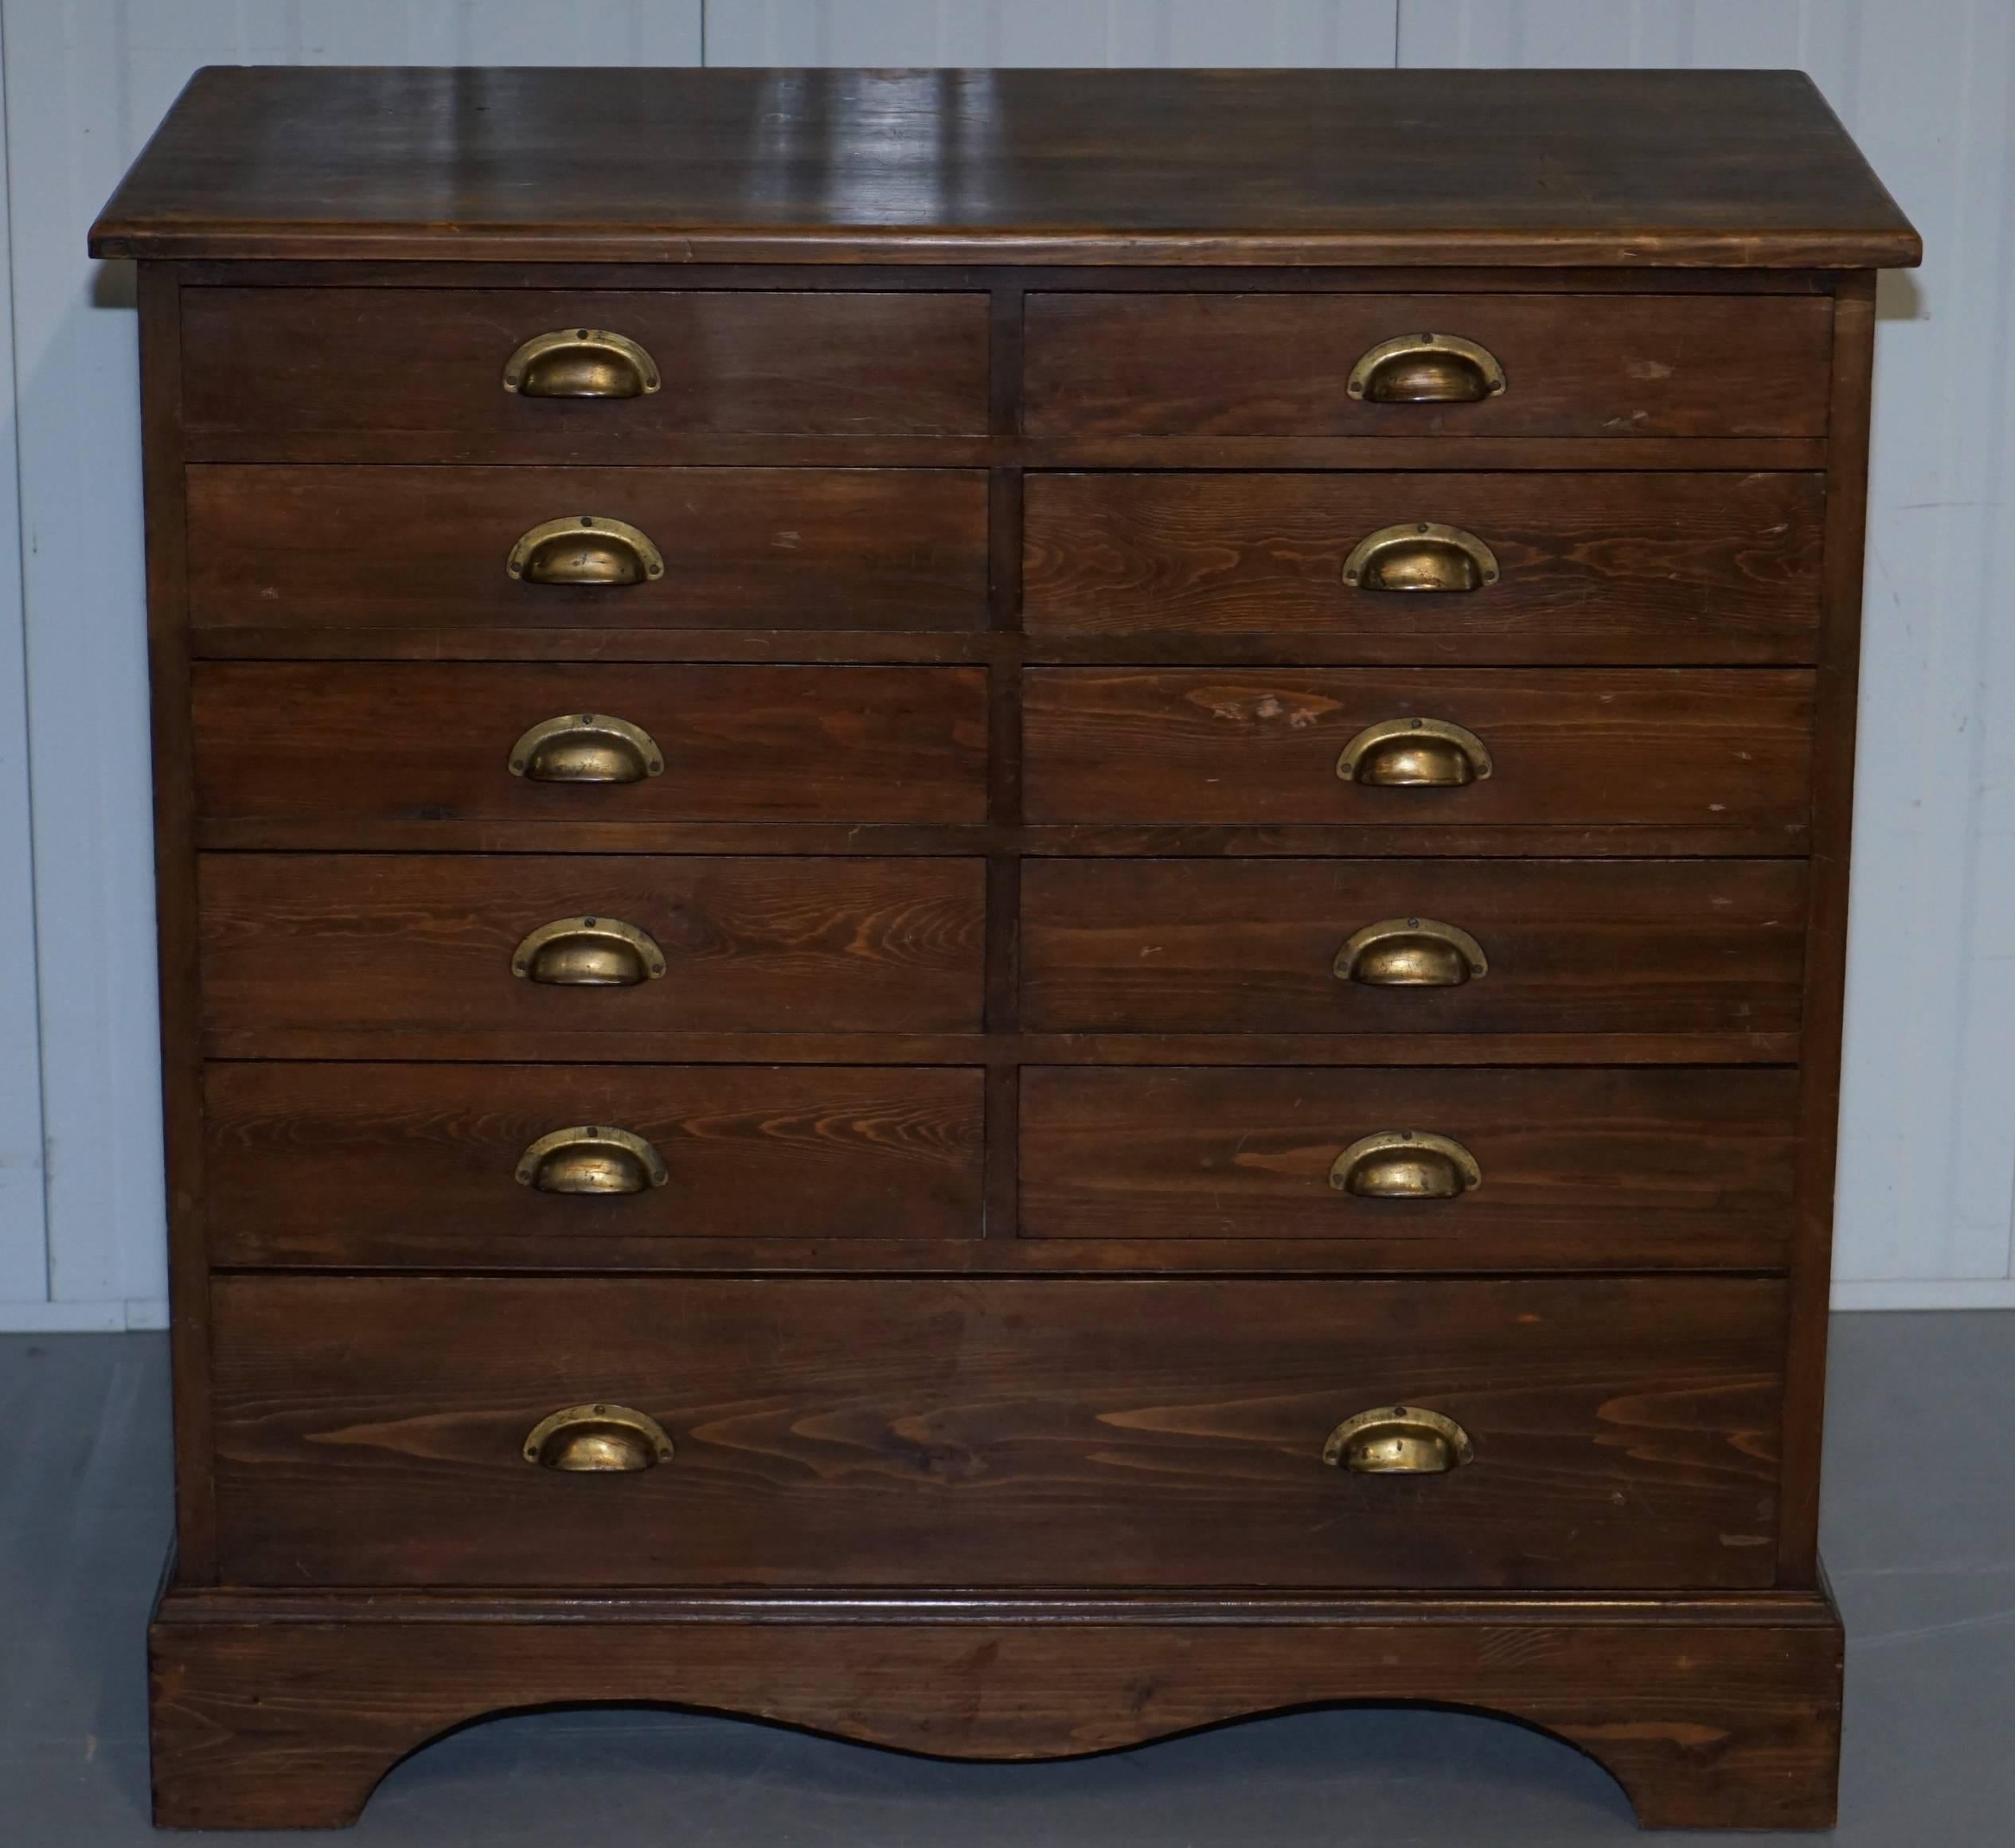 We are delighted to offer for sale this stunning original Victorian photographers bank / chest of drawers

A very lovely piece in lightly restored condition throughout, we have deep cleaned hand condition waxed and hand polished it

This chest